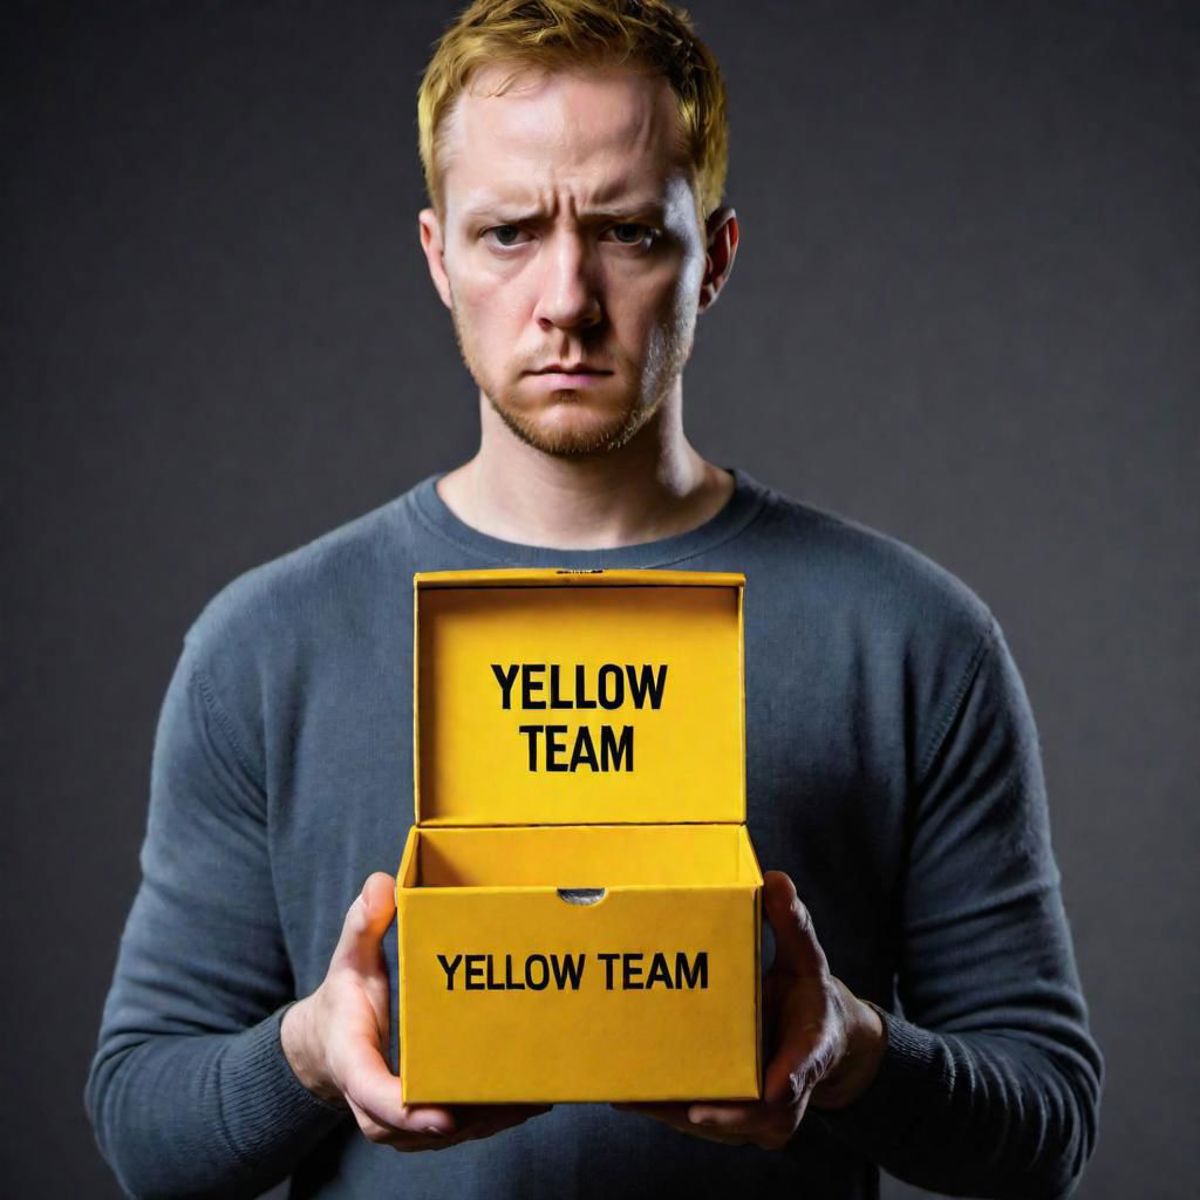 Man holding a yellow box that says "Yellow Team".